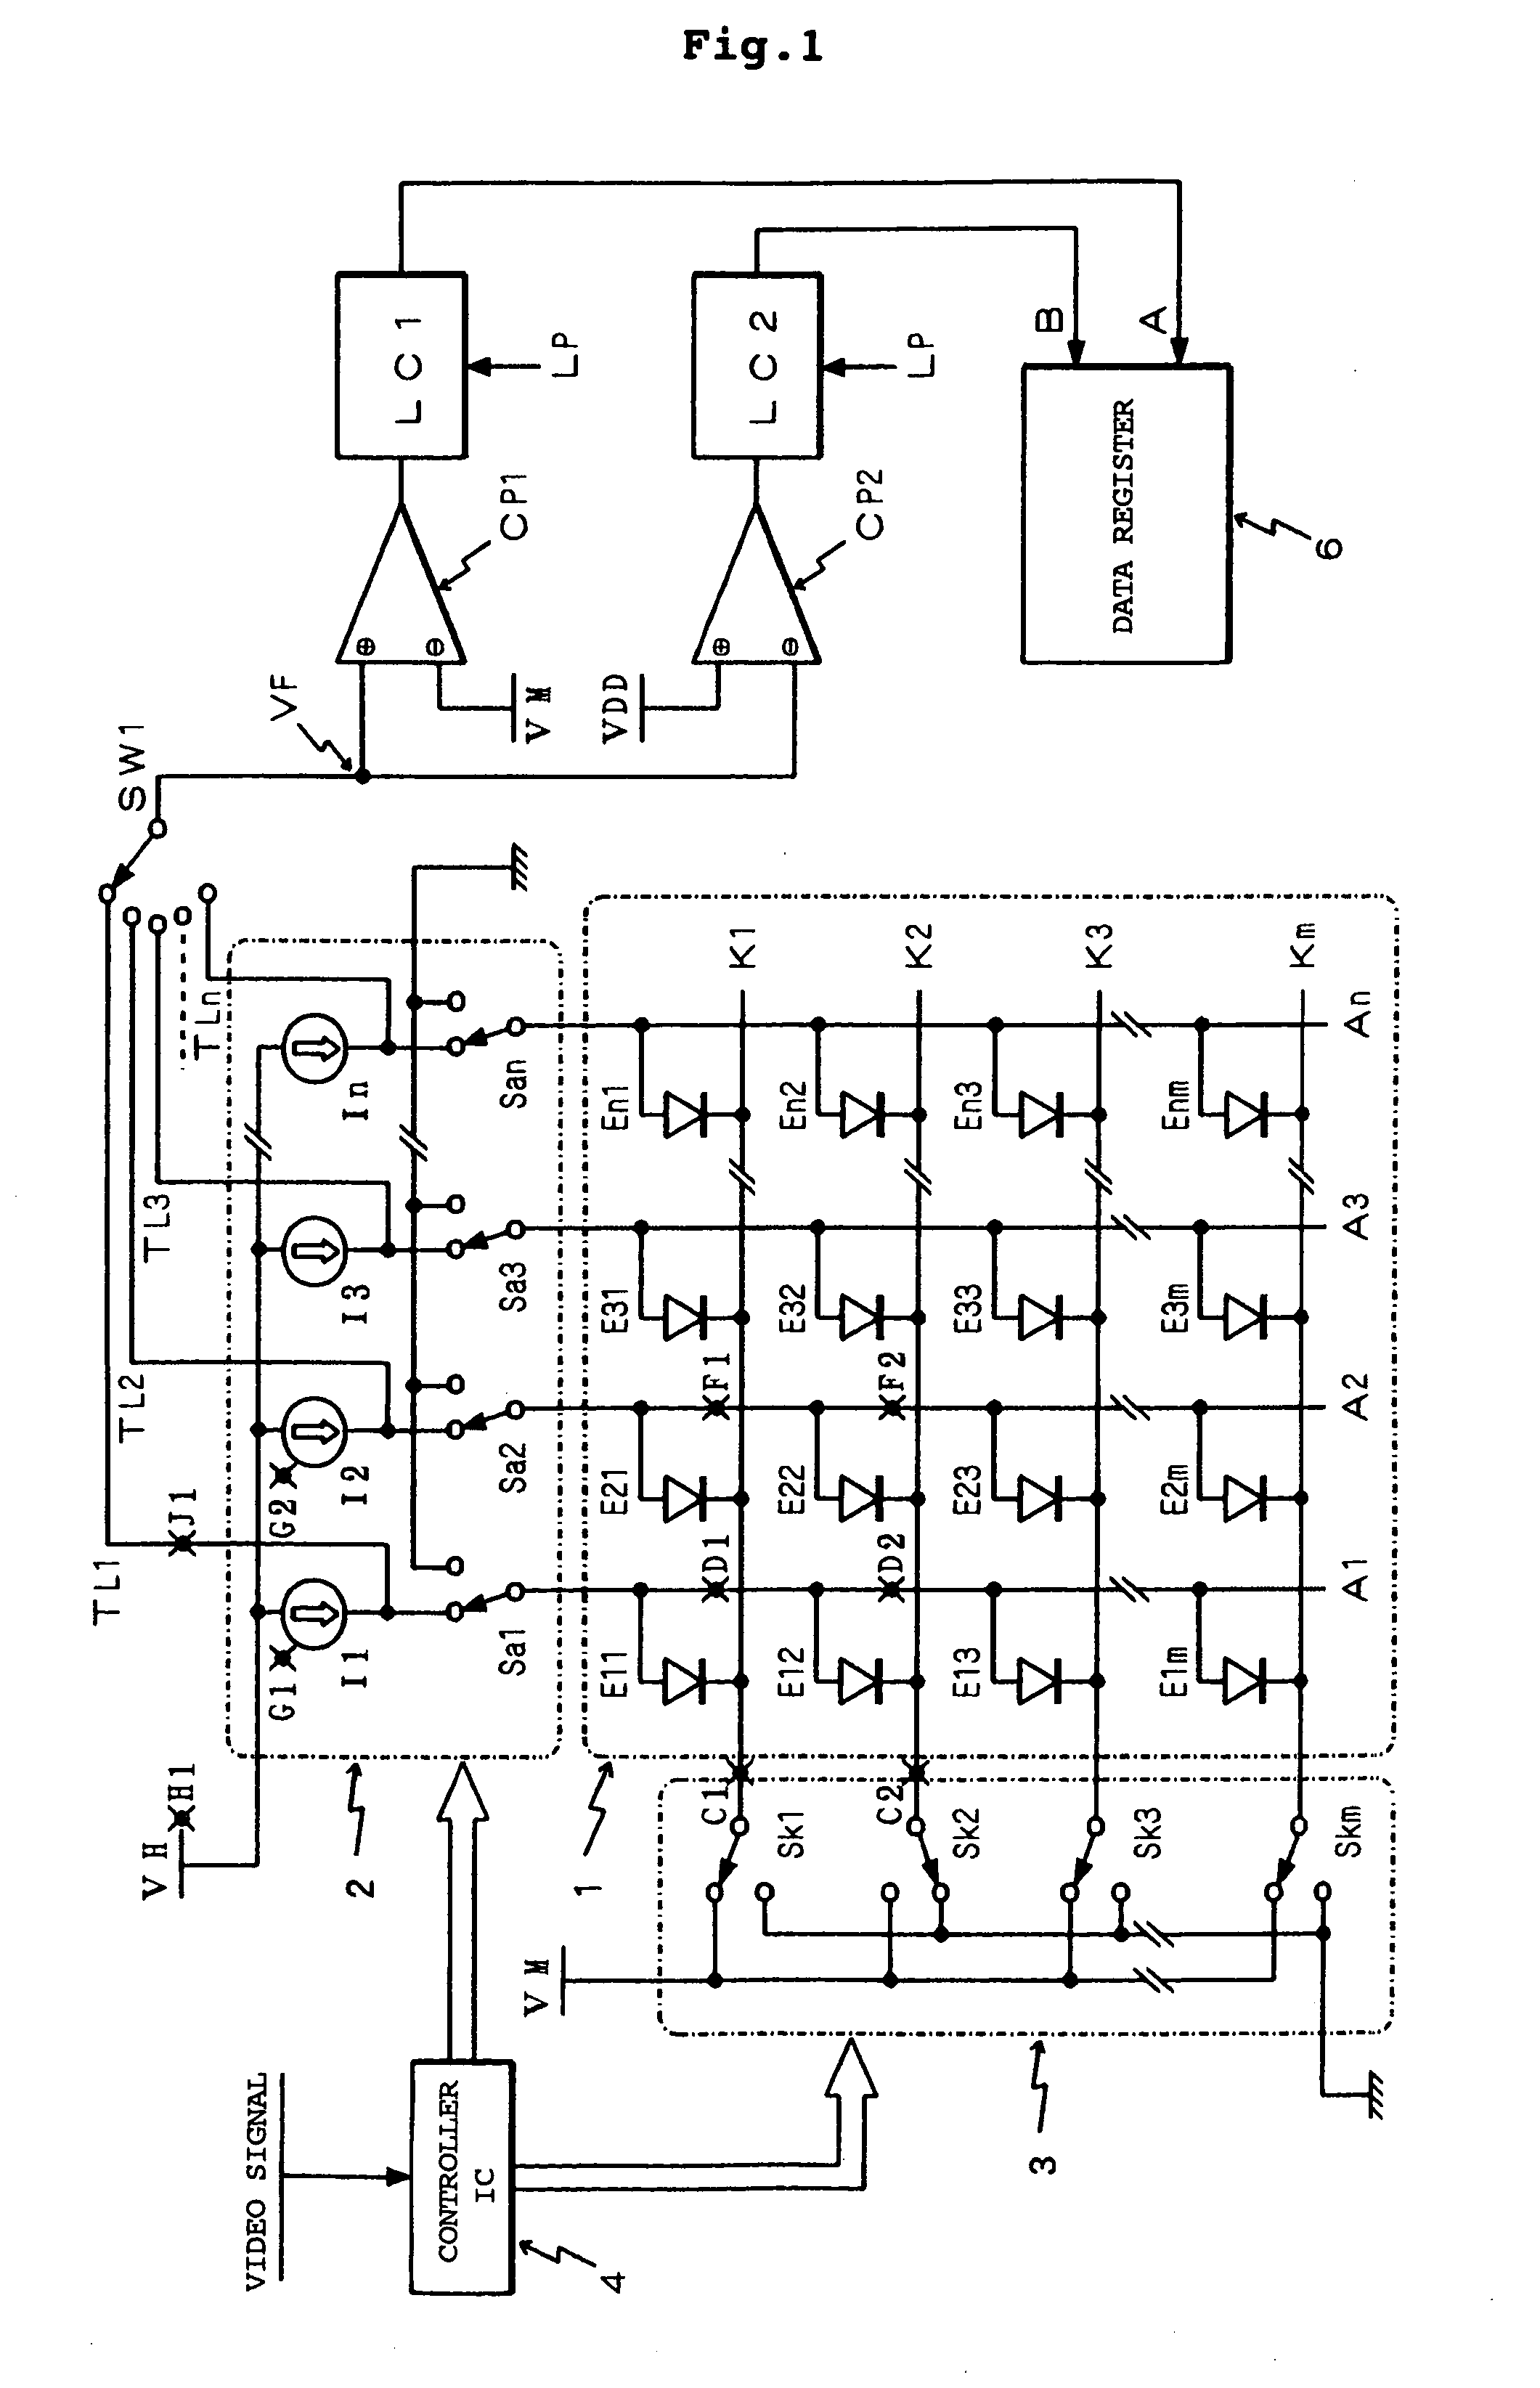 Self light emitting display module, electronic equipment into which the same module is loaded, and inspection method of a defect state in the same module